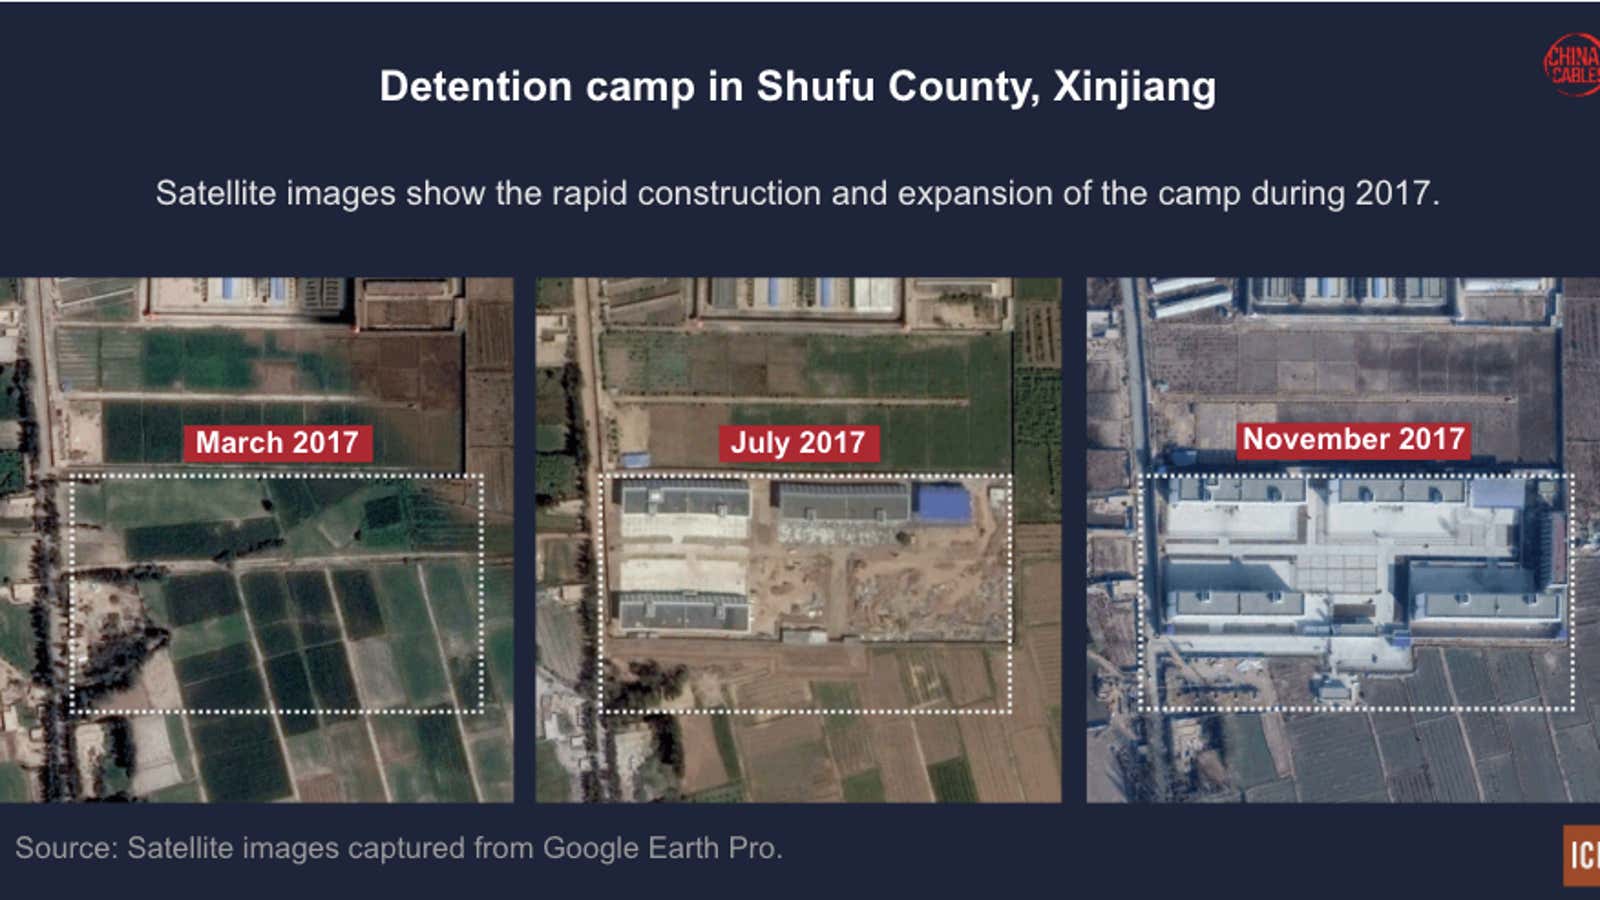 The creation of a detention camp in Xinjiang.